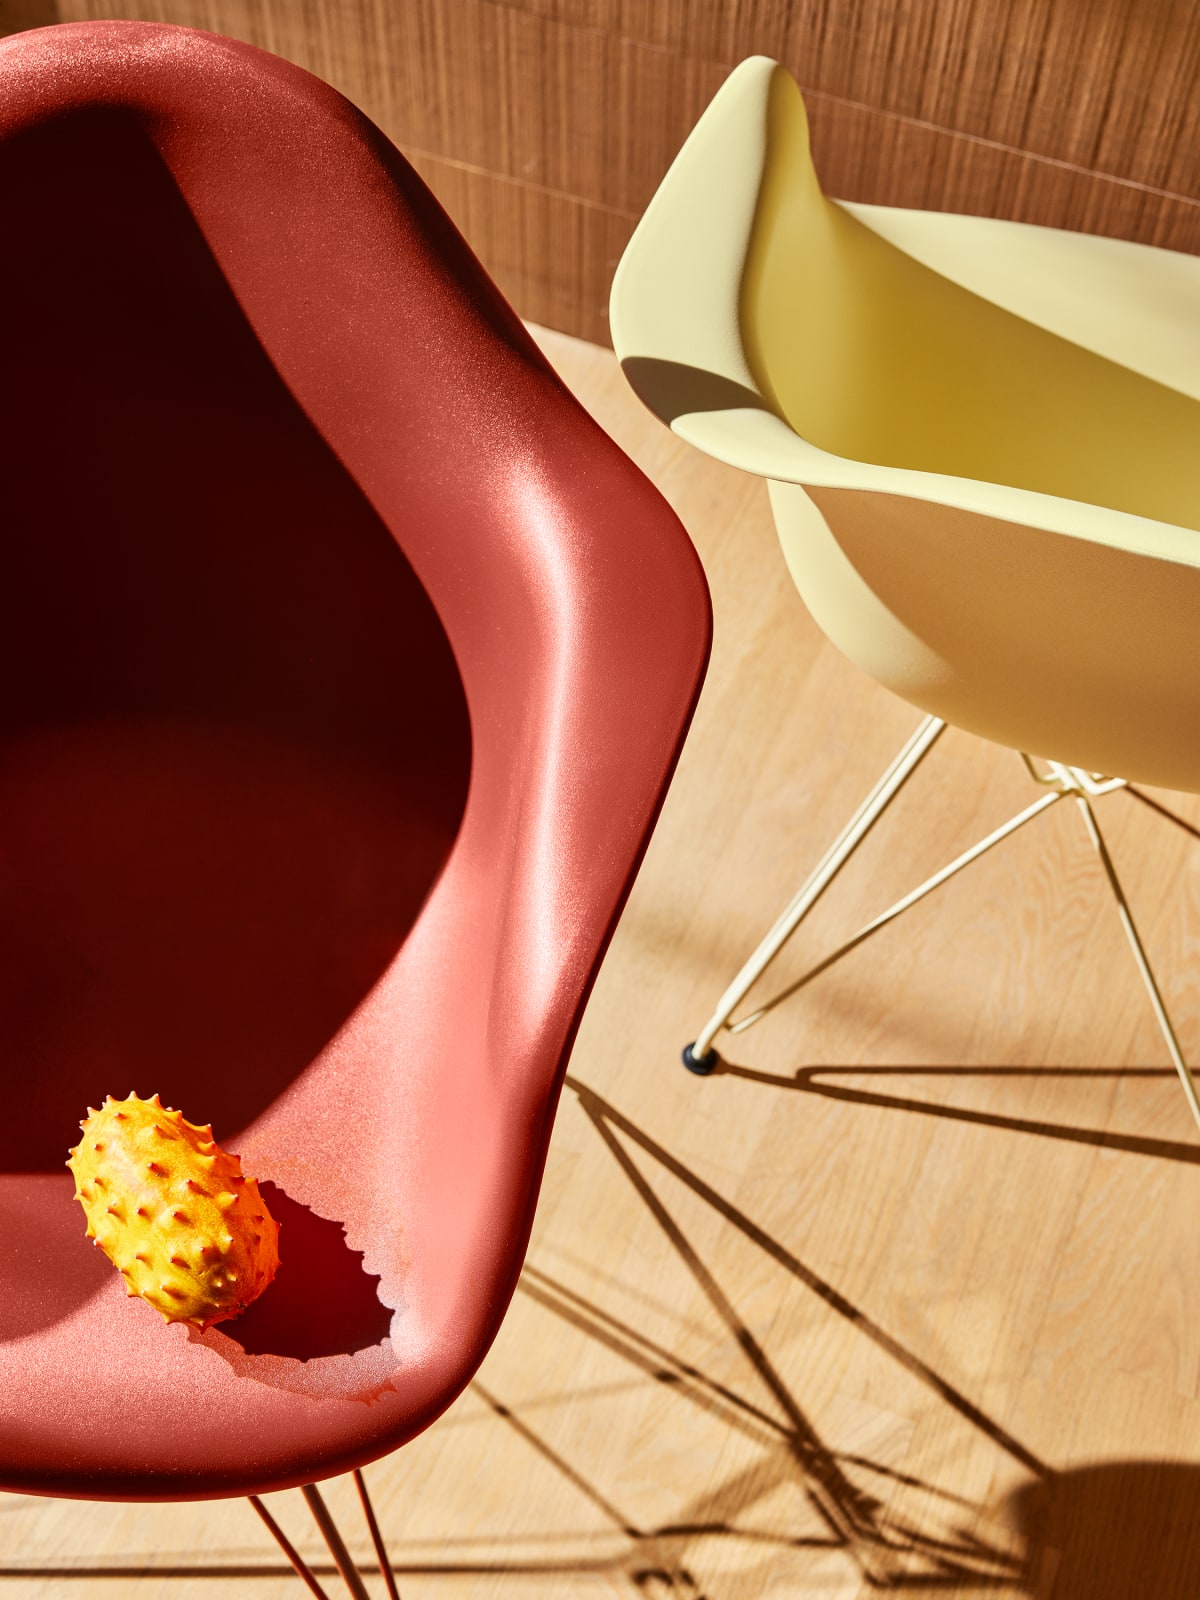 Herman Miller x HAY, Eames Molded Plastic Armchair details of iron red and yellow, with fruit